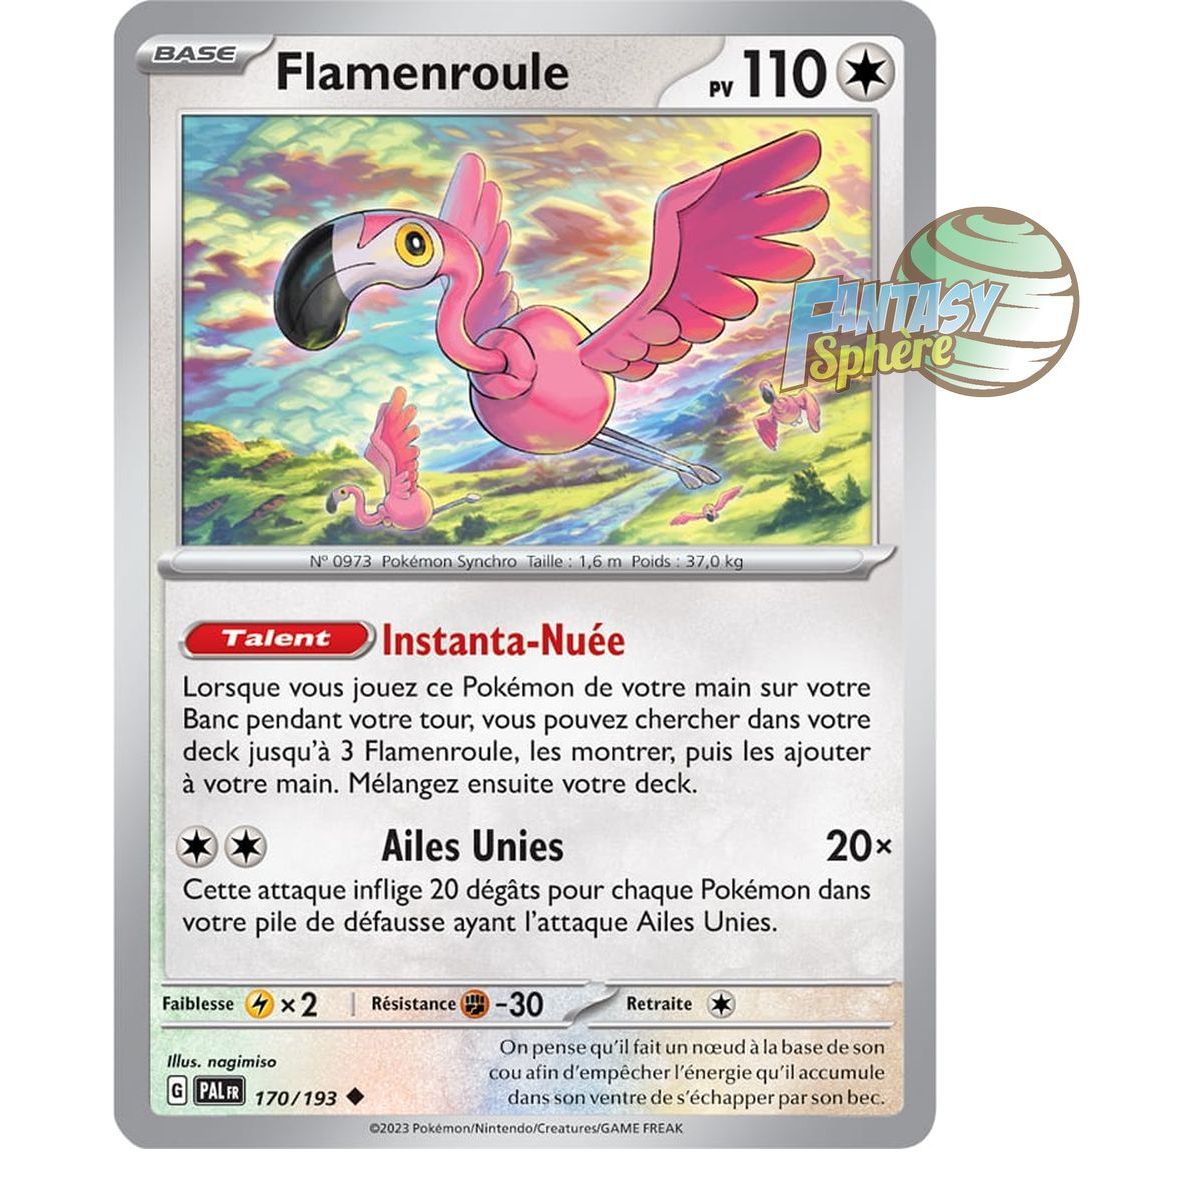 Item Flamroule - Uncommon 170/193 - Scarlet and Violet Evolution in Paldea